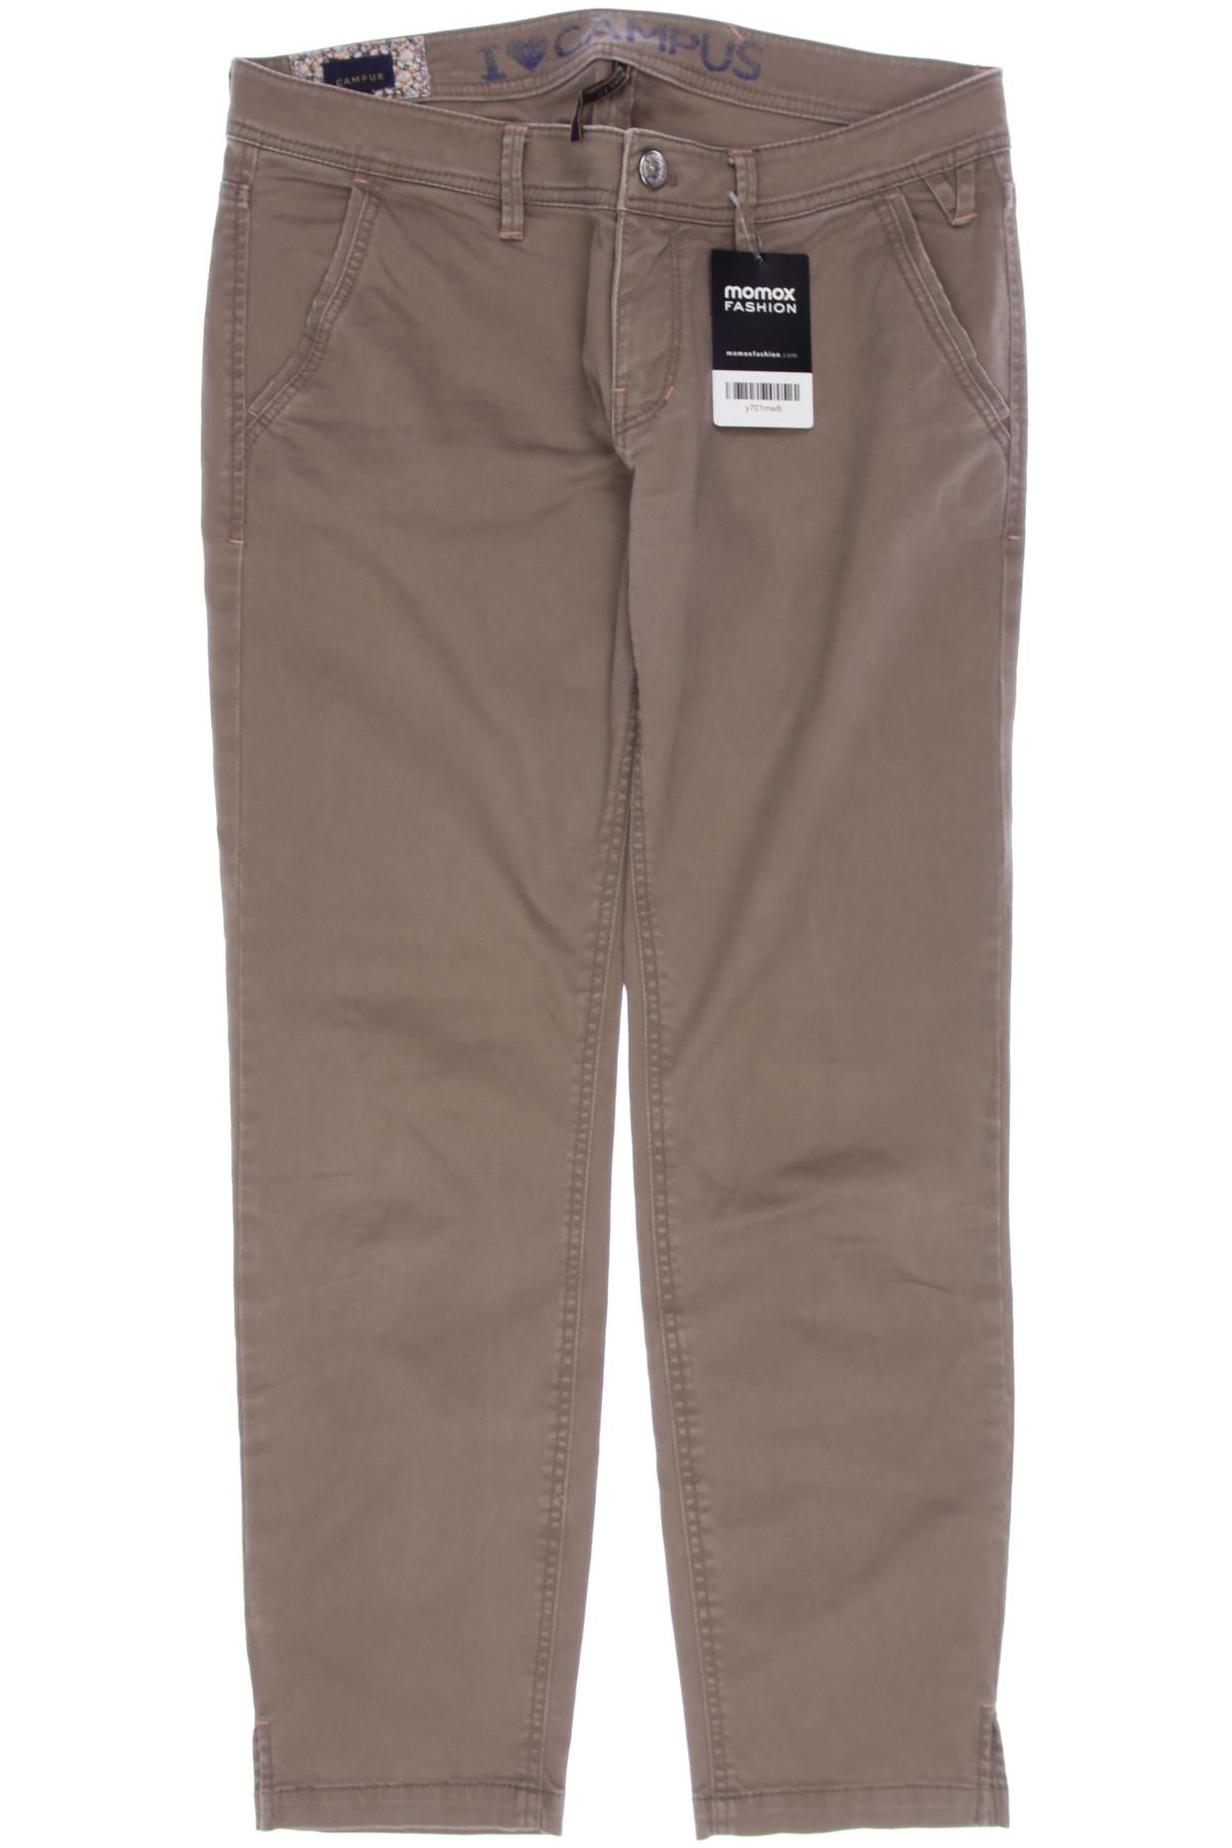 CAMPUS by Marc O'Polo Damen Jeans, beige von CAMPUS by Marc O'Polo